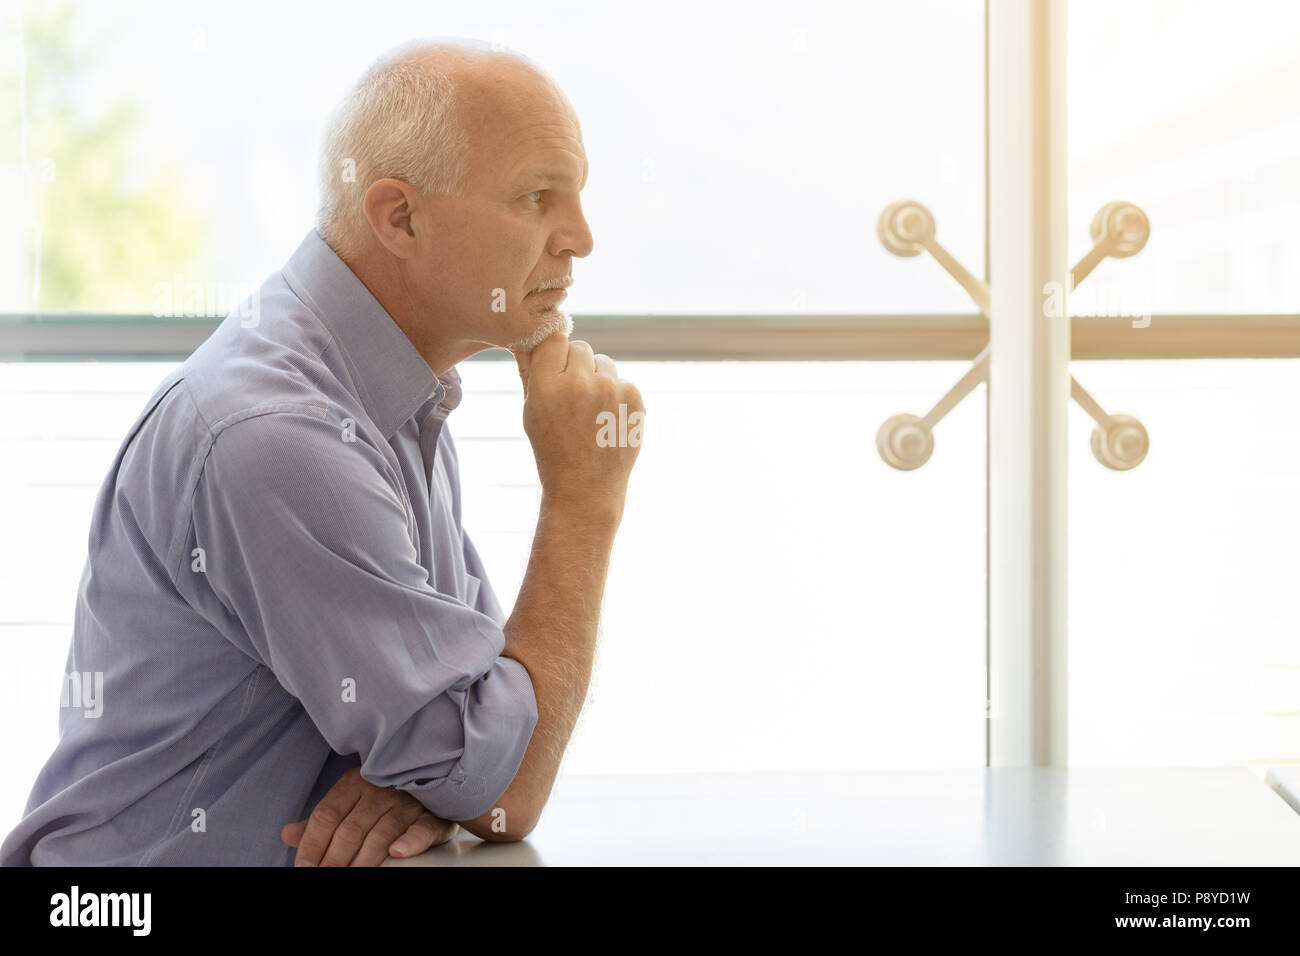 Profile view of Business man propping chin up with arm and staring straight ahead. Stock Photo